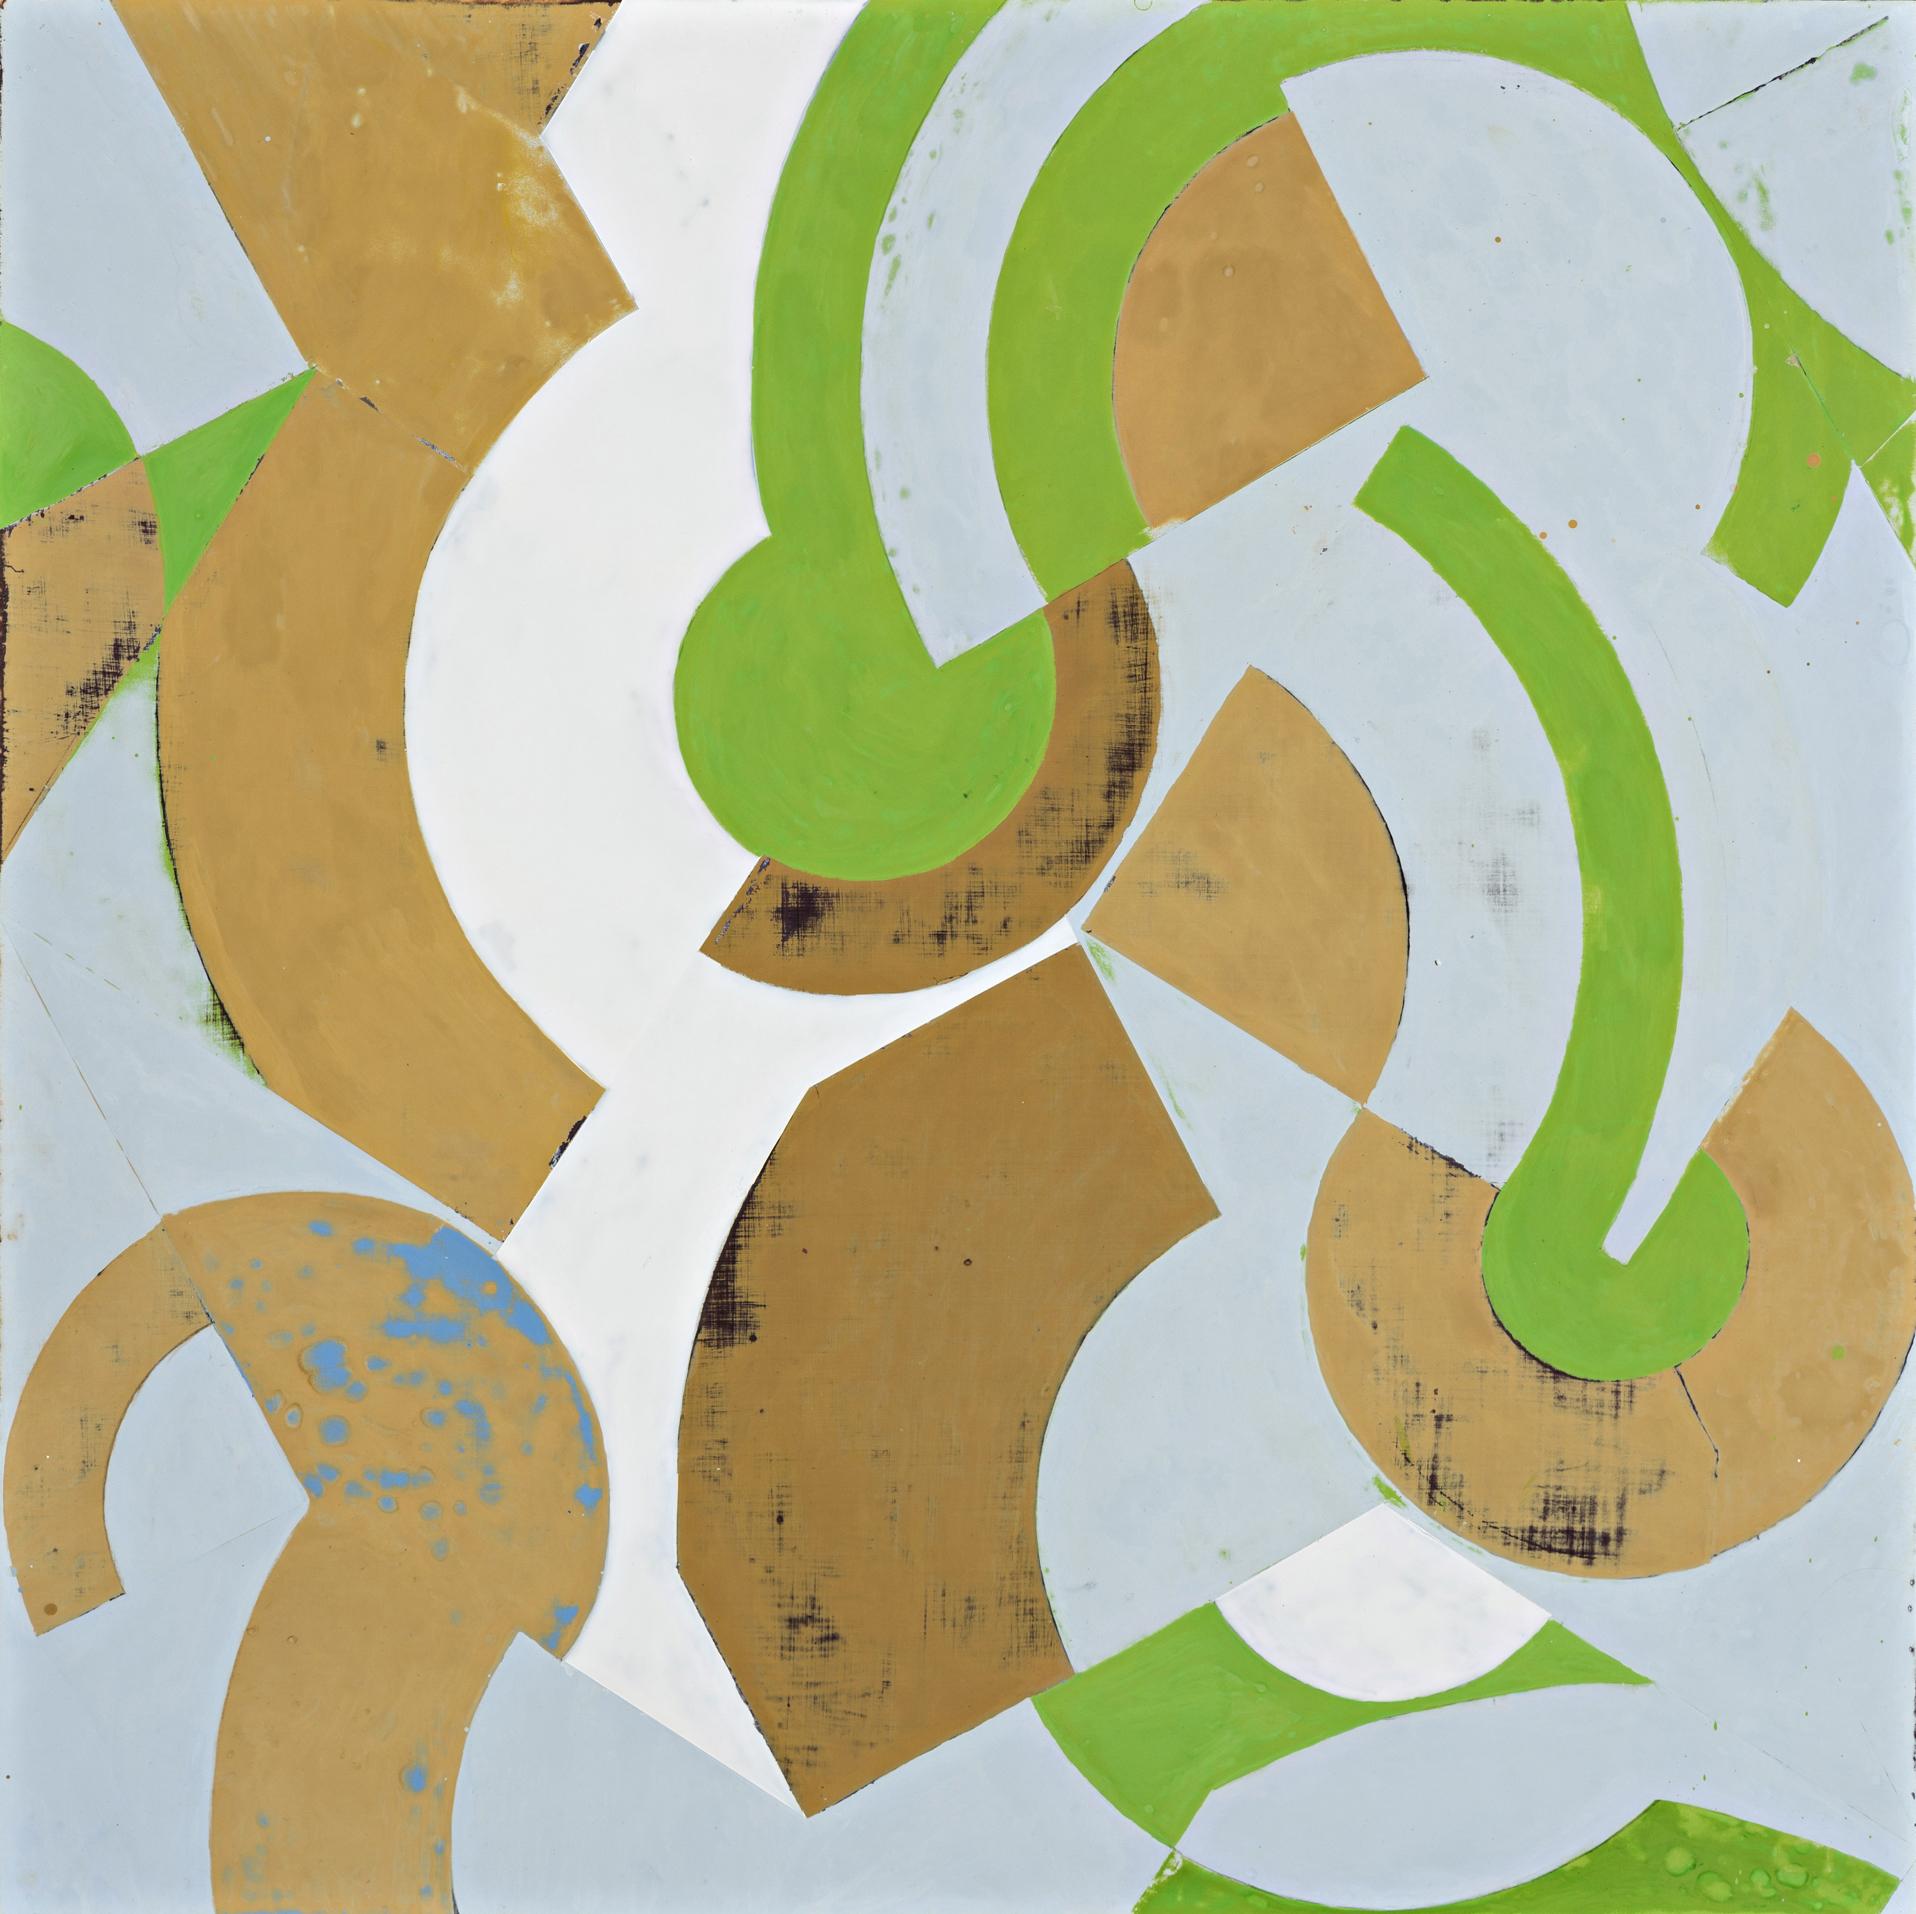 Geometric and gestural abstract painting on canvas in earth tones of green, beige, tan, green, light brown, and blue.
Plan for Spring #1, by Jeanette Fintz in 2018
24 x 24 x 2 inches acrylic on wood panel
Signed verso, ready to install

Pairs as a